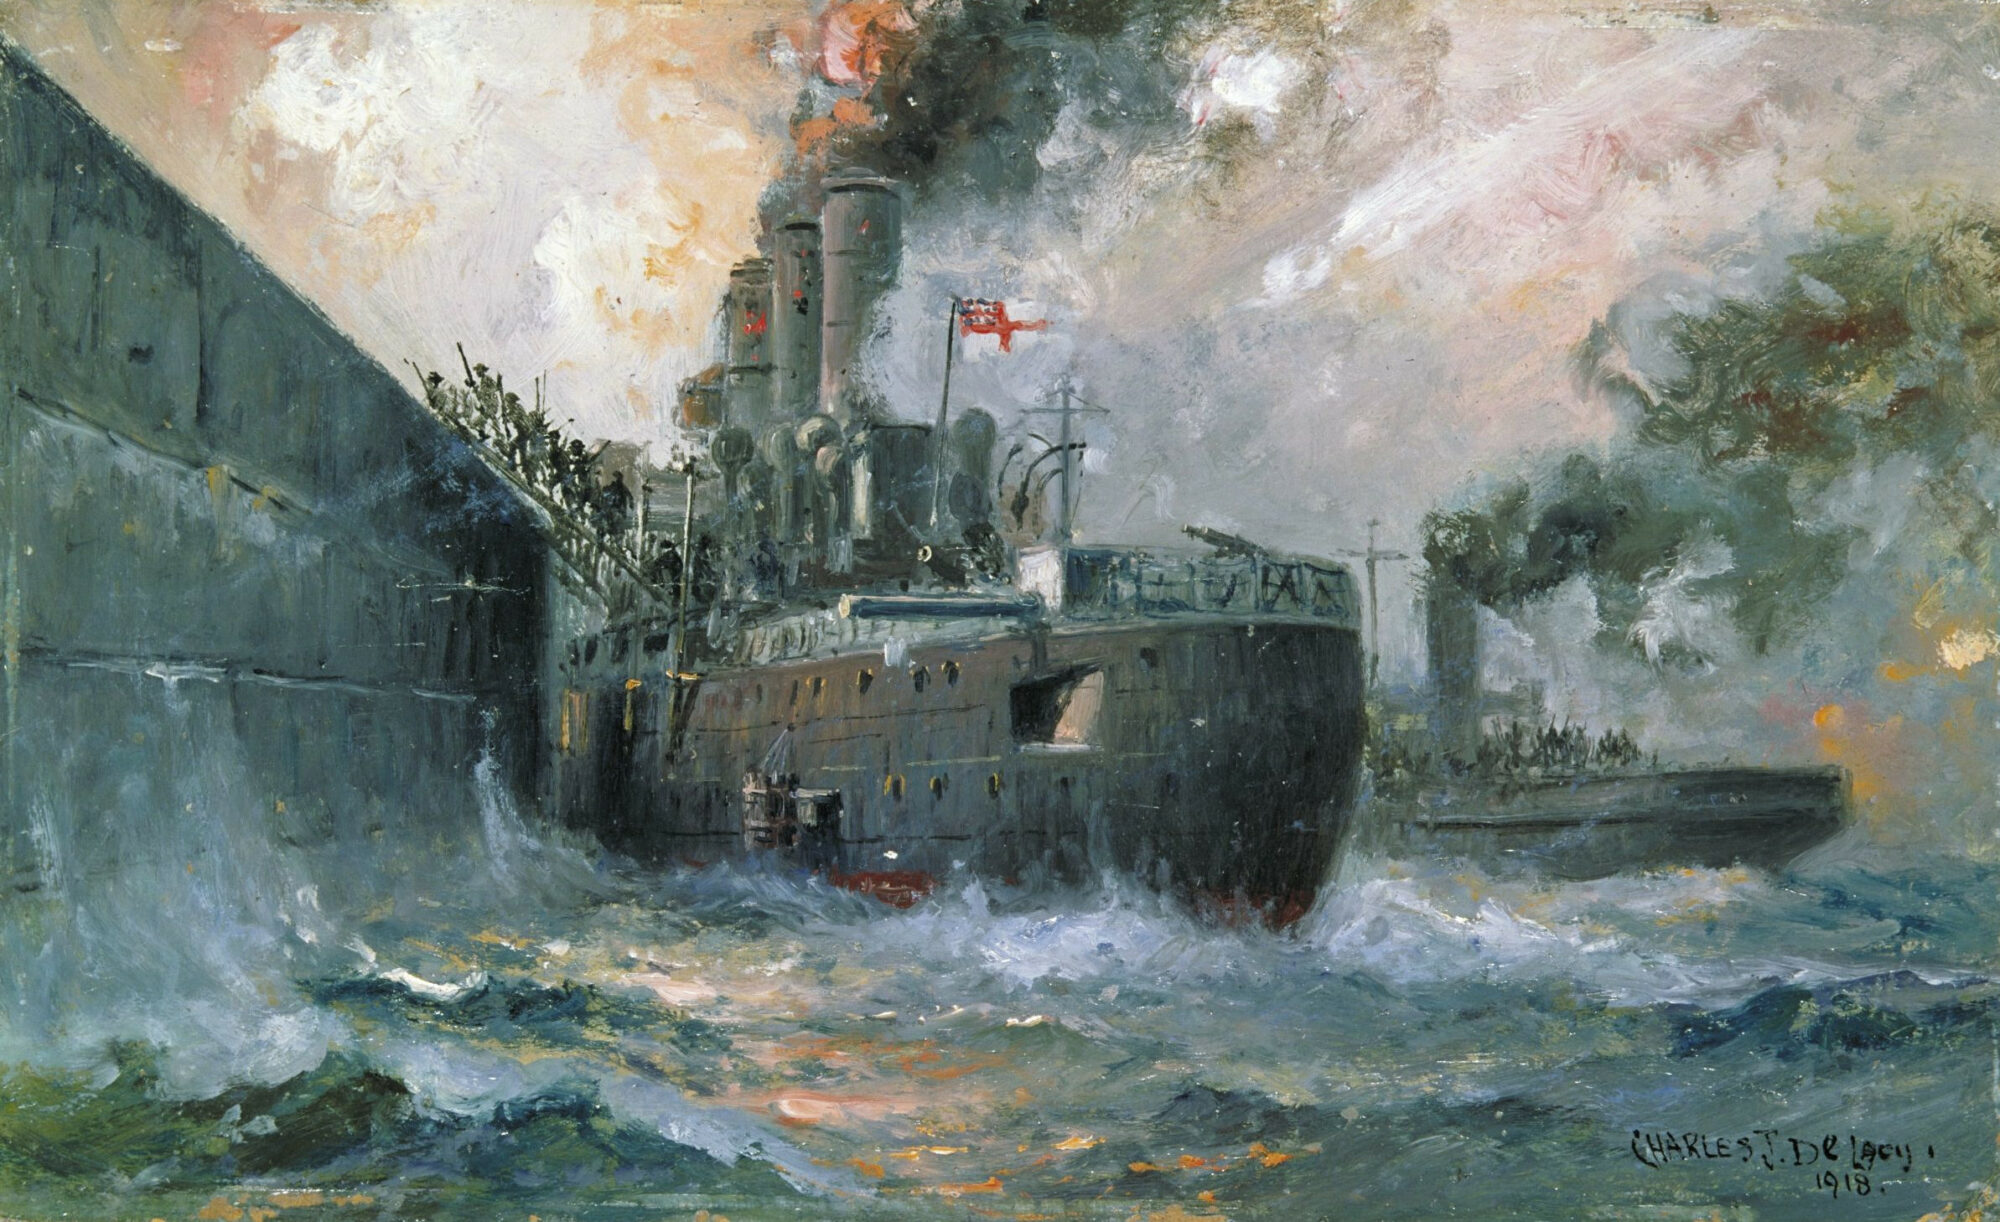 The Liverpool ferryboat Daffodil rides alongside the cruiser Vindictive as Royal Marines disembark the cruiser’s battered decks in this painting by Charles J. de Lacy.